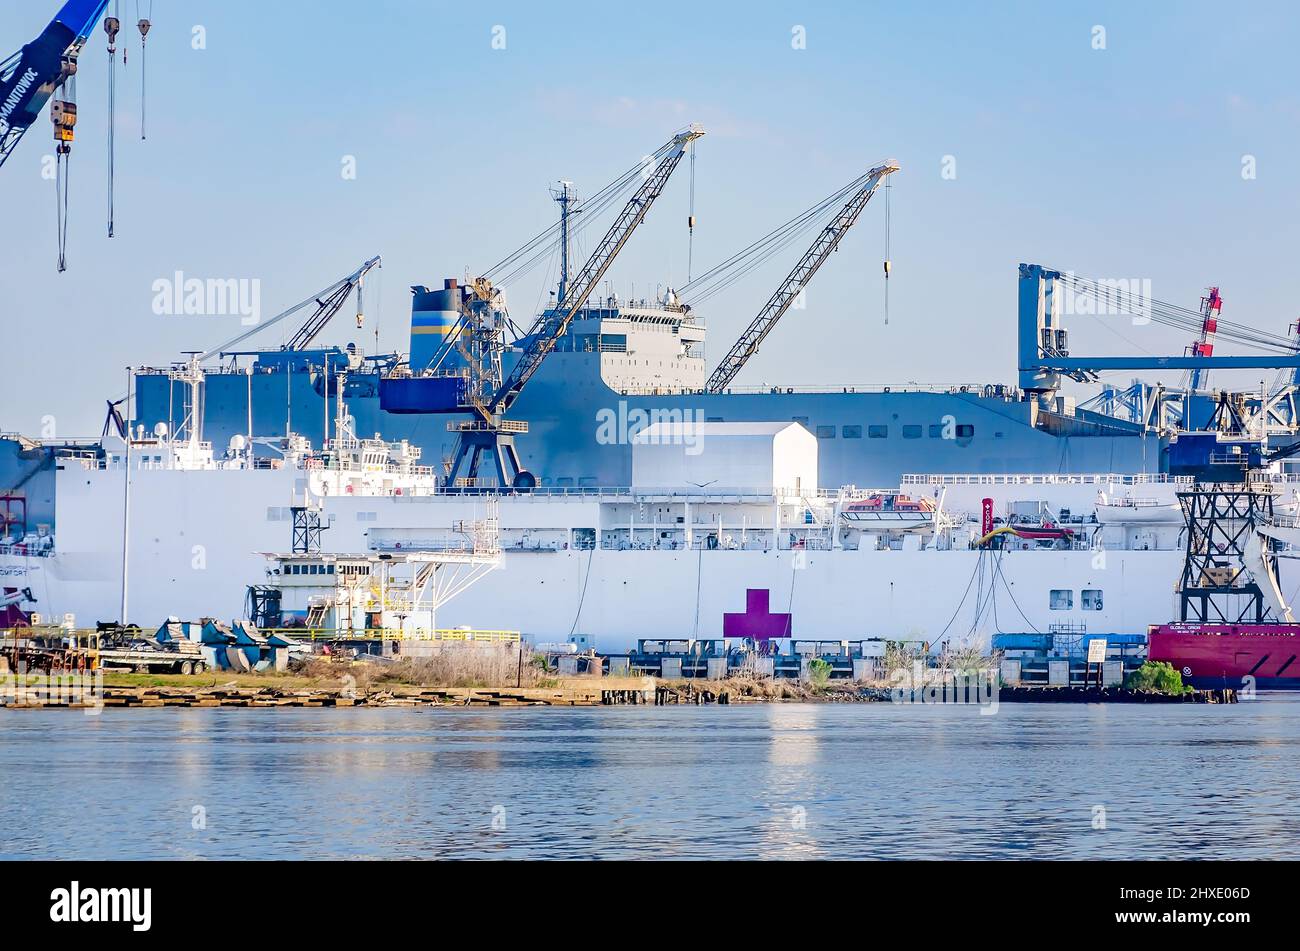 The USNS Comfort, a Navy hospital ship, is docked for repairs at Alabama Shipyard, March 10, 2022, in Mobile, Alabama. Stock Photo